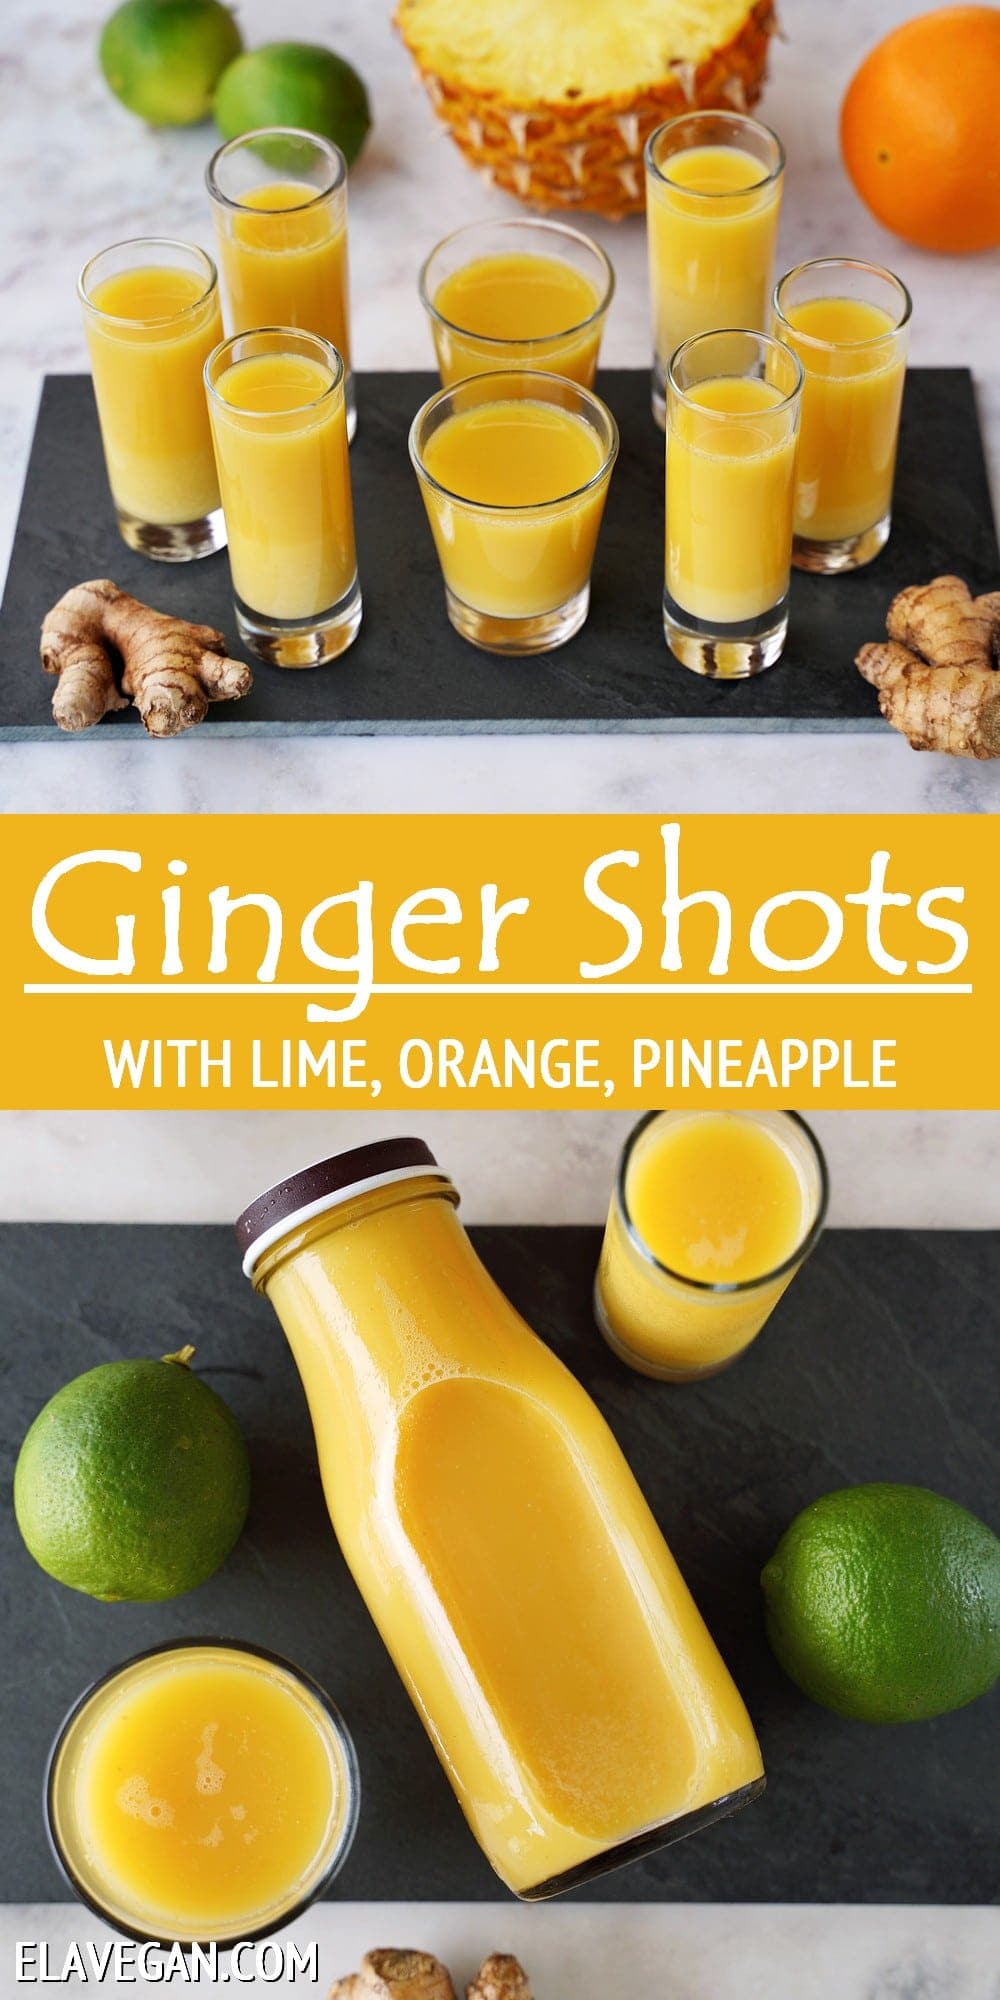 Pinterest Collage Ginger Shots with lime, orange, pineapple